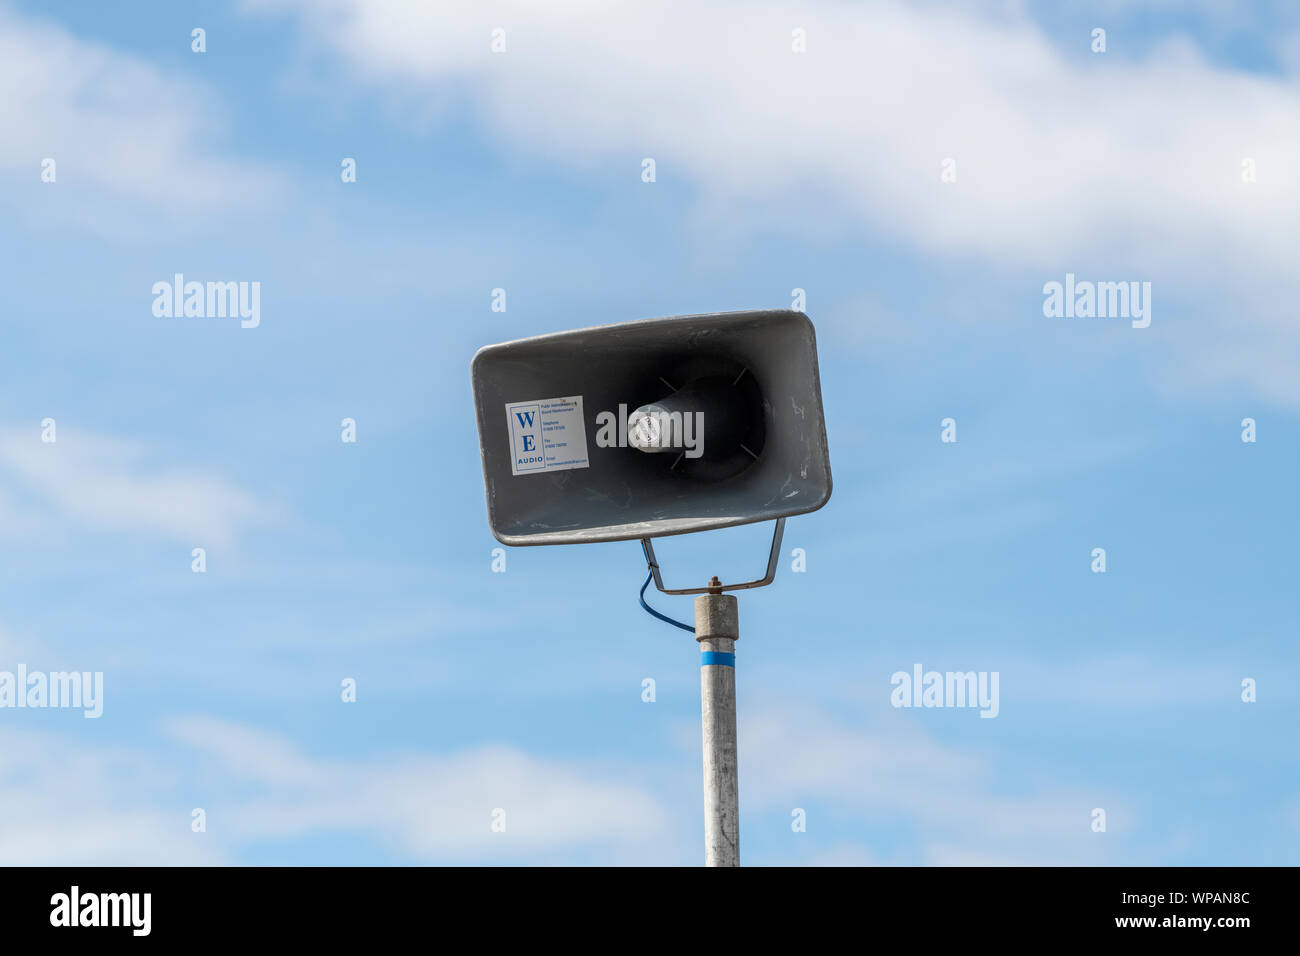 Public address system loudspeaker mounted on a pole and photographed against a blue sky Stock Photo